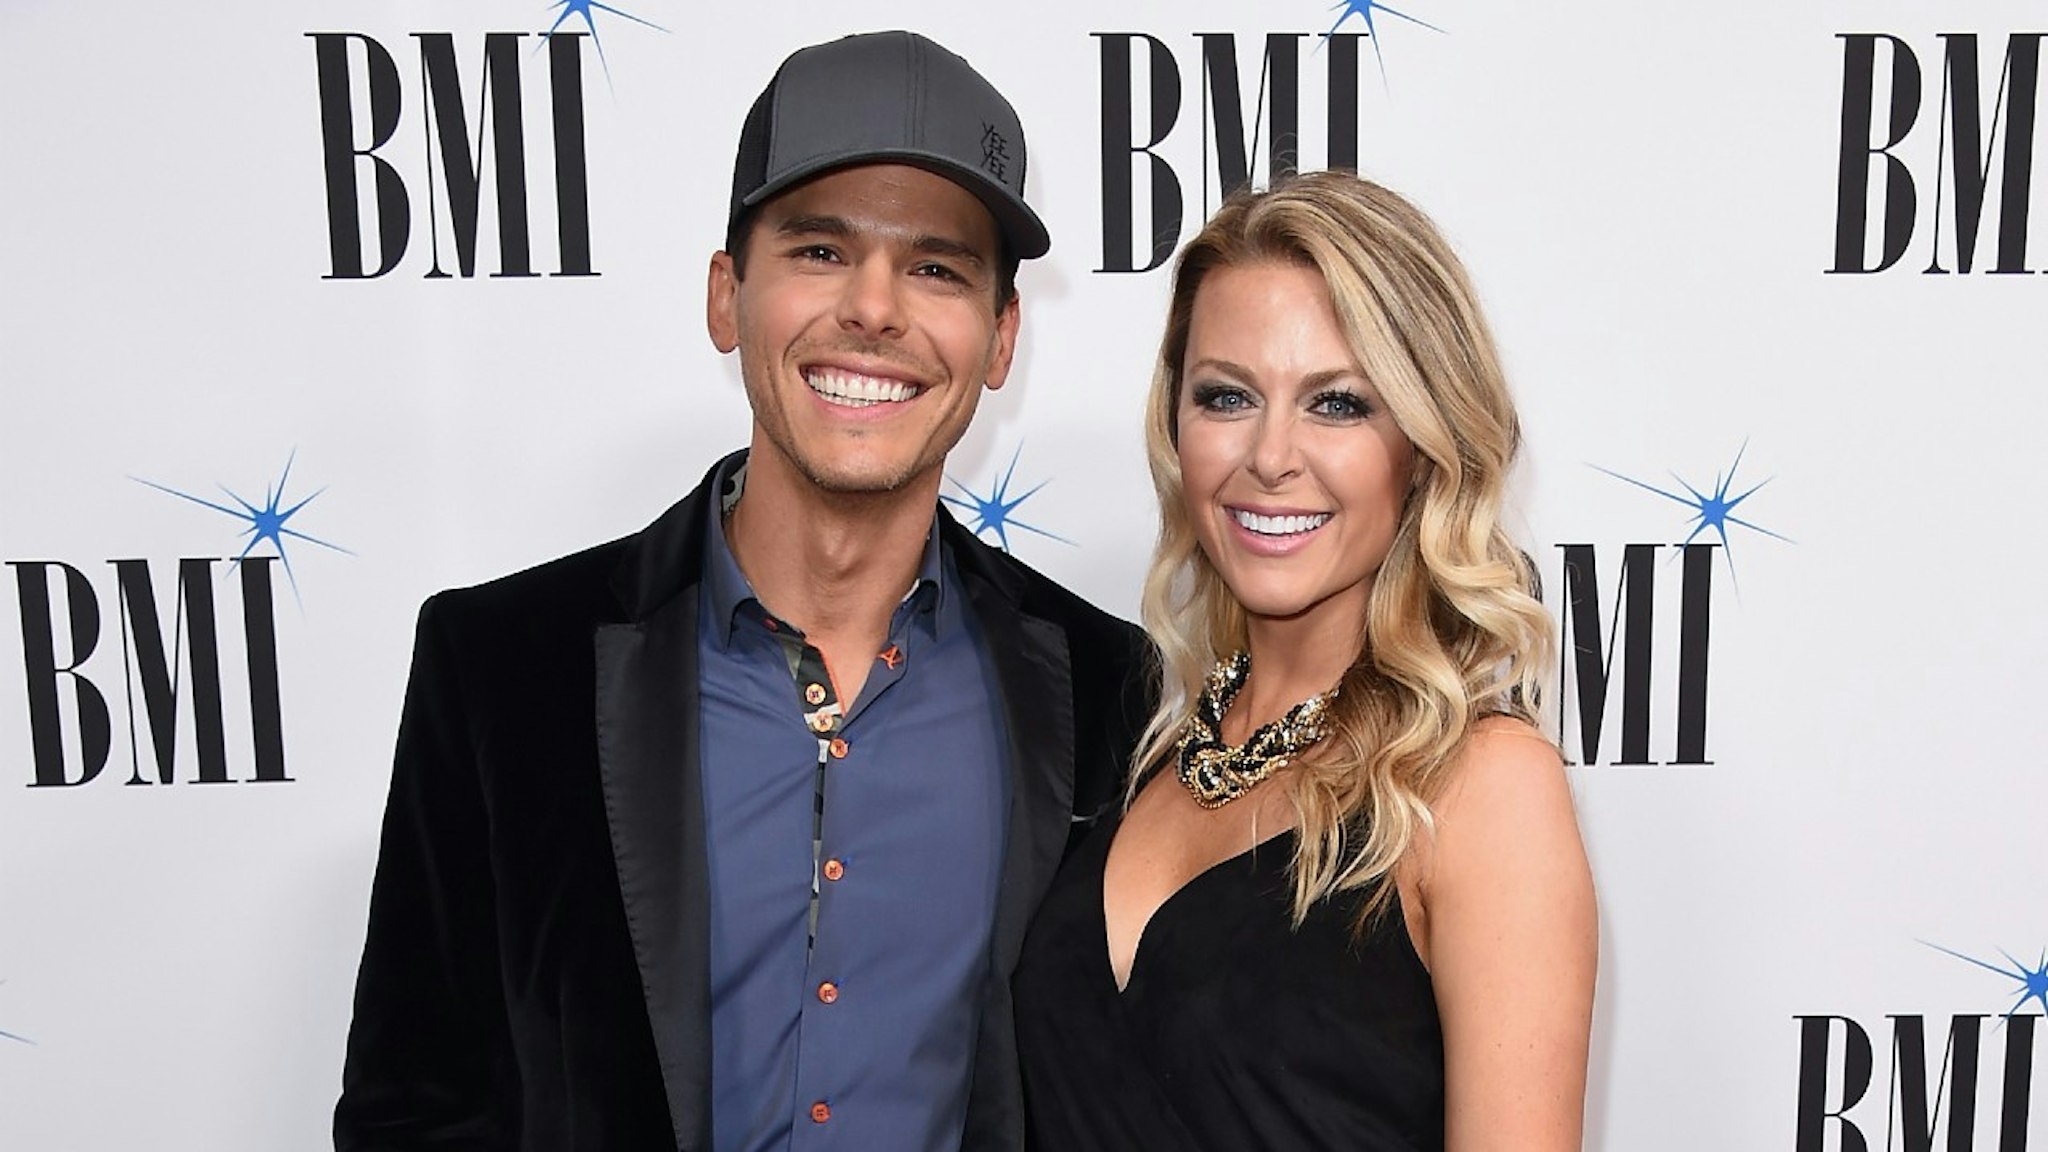 Singer-songwriter Granger Smith (L) and Amber Bartlett attend the 65th Annual BMI Country awards on November 7, 2017 in Nashville, Tennessee.